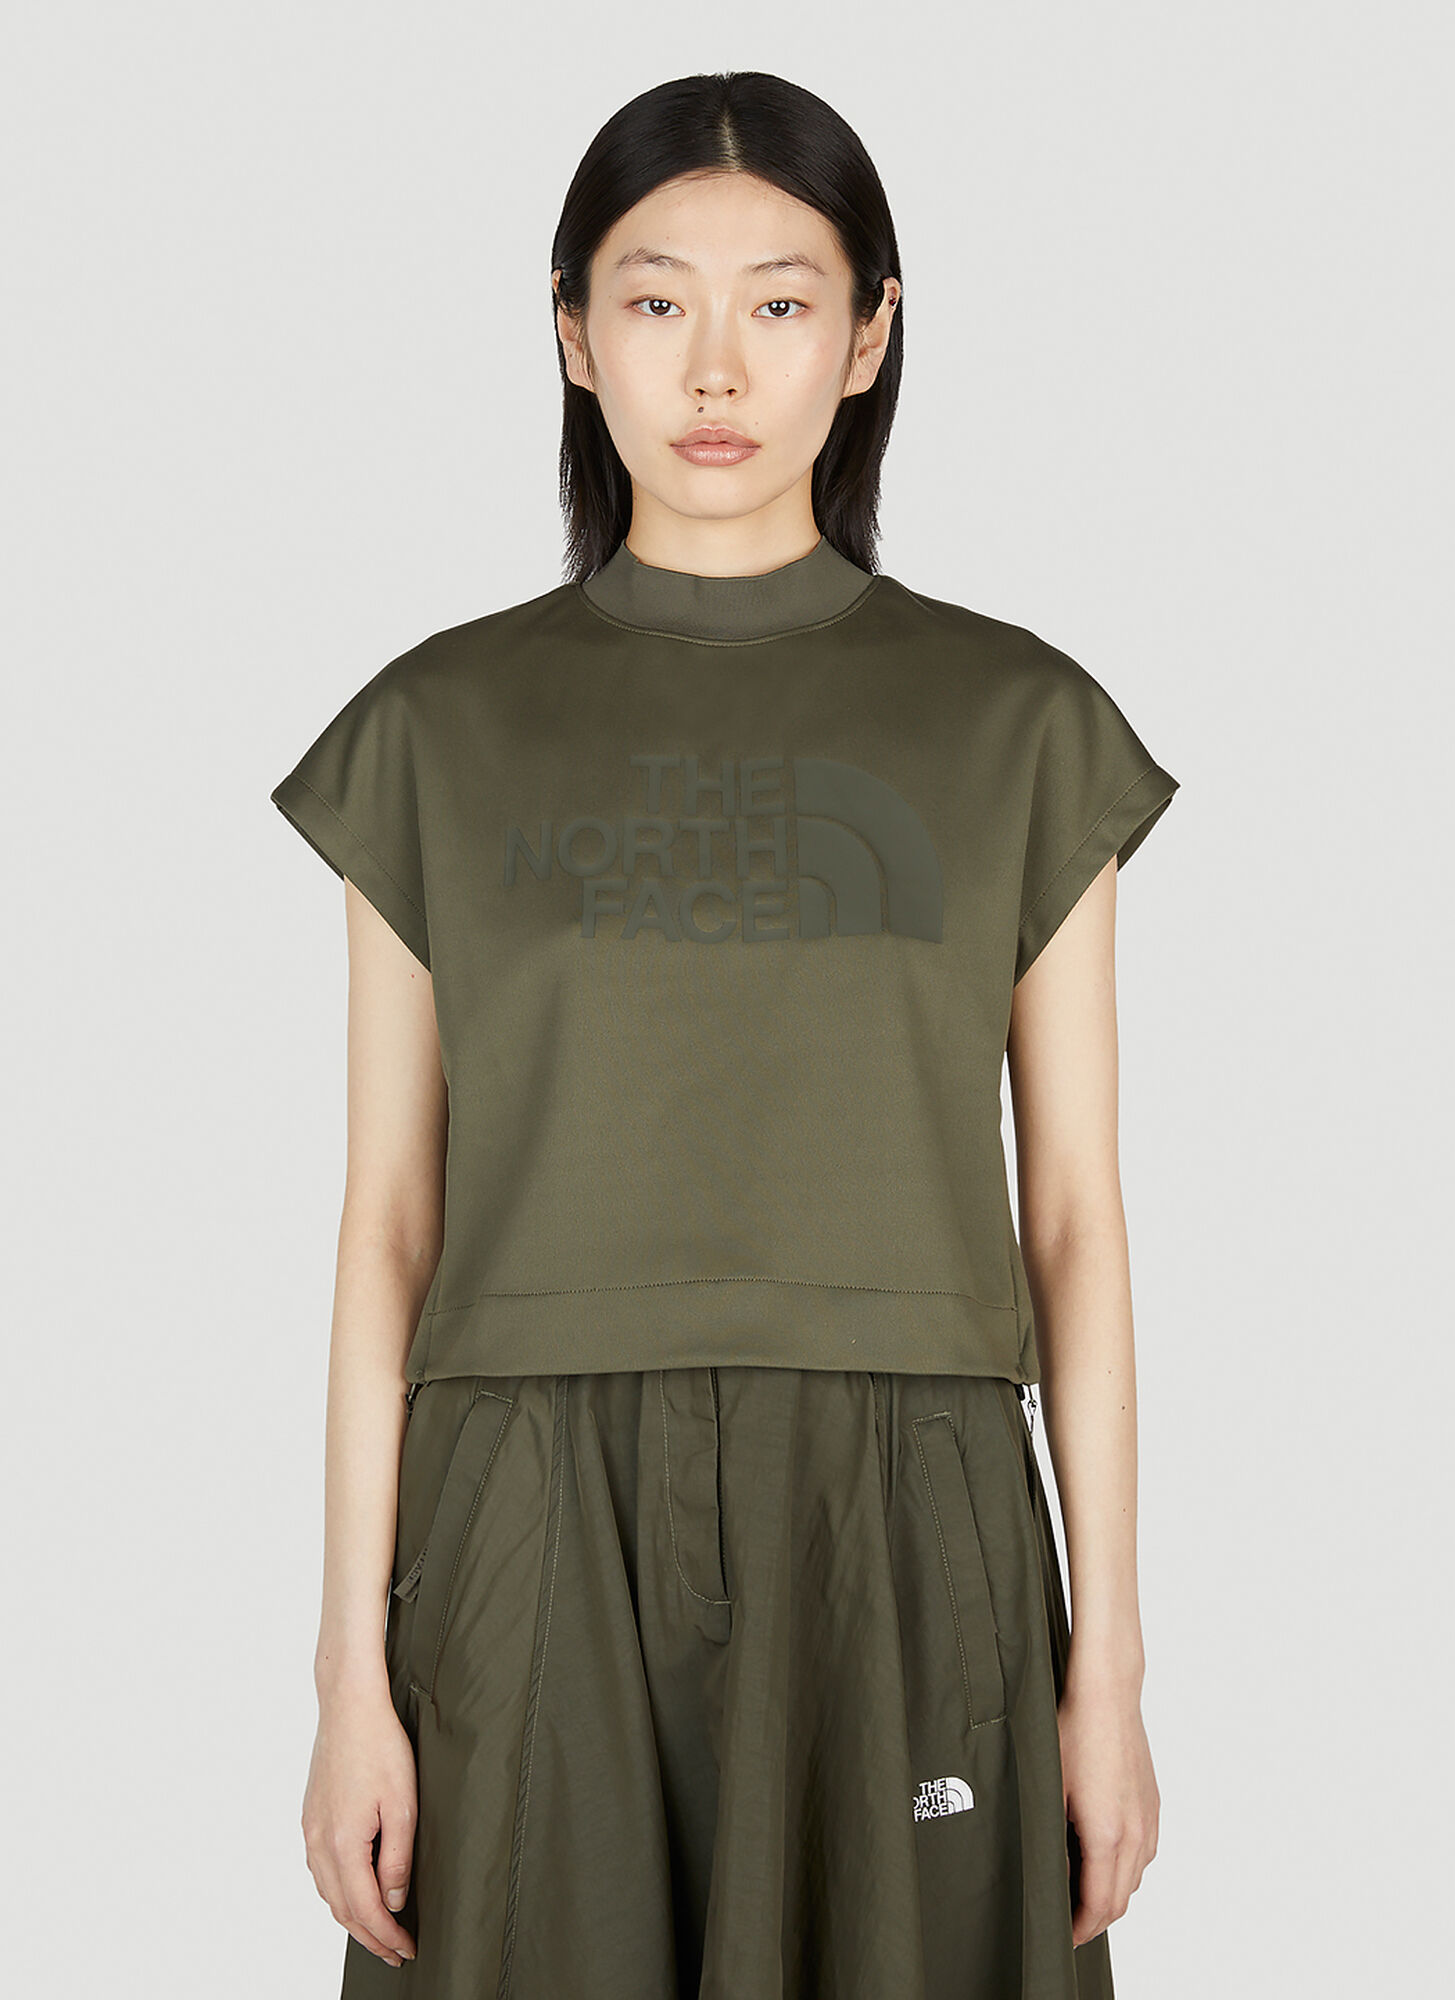 THE NORTH FACE LOGO PRINT CROPPED T-SHIRT